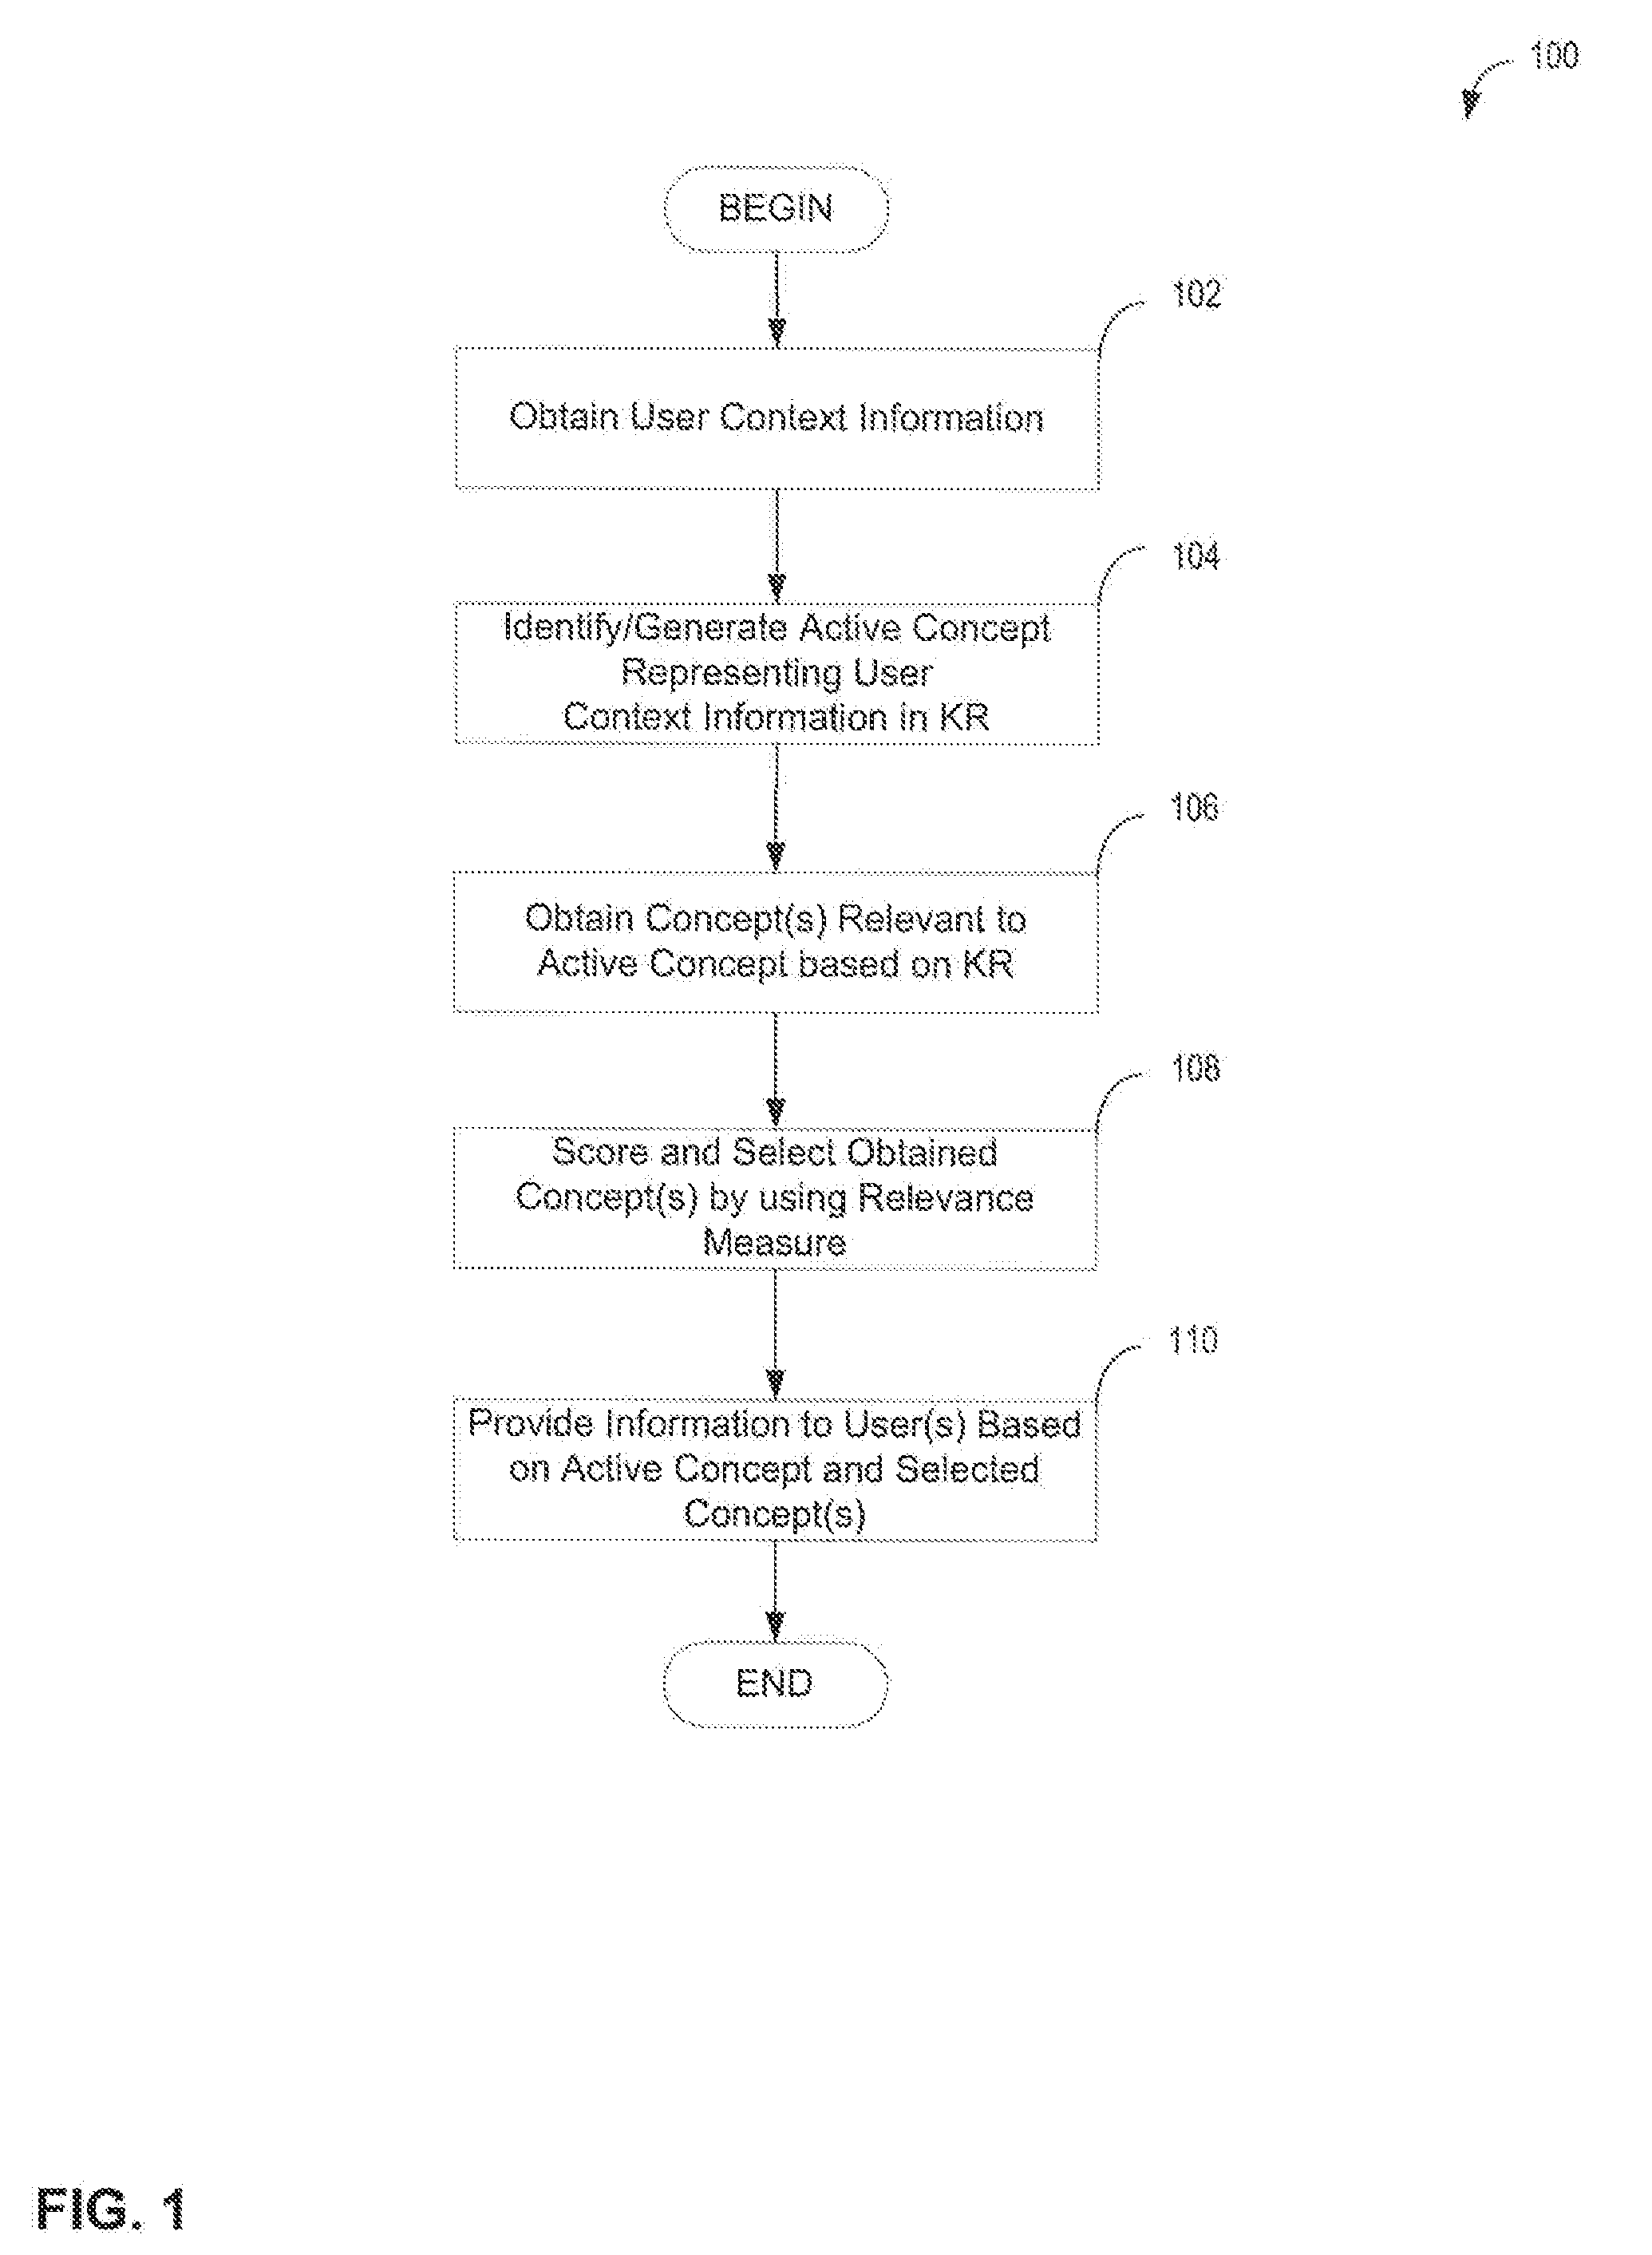 System and method for using a knowledge representation to provide information based on environmental inputs